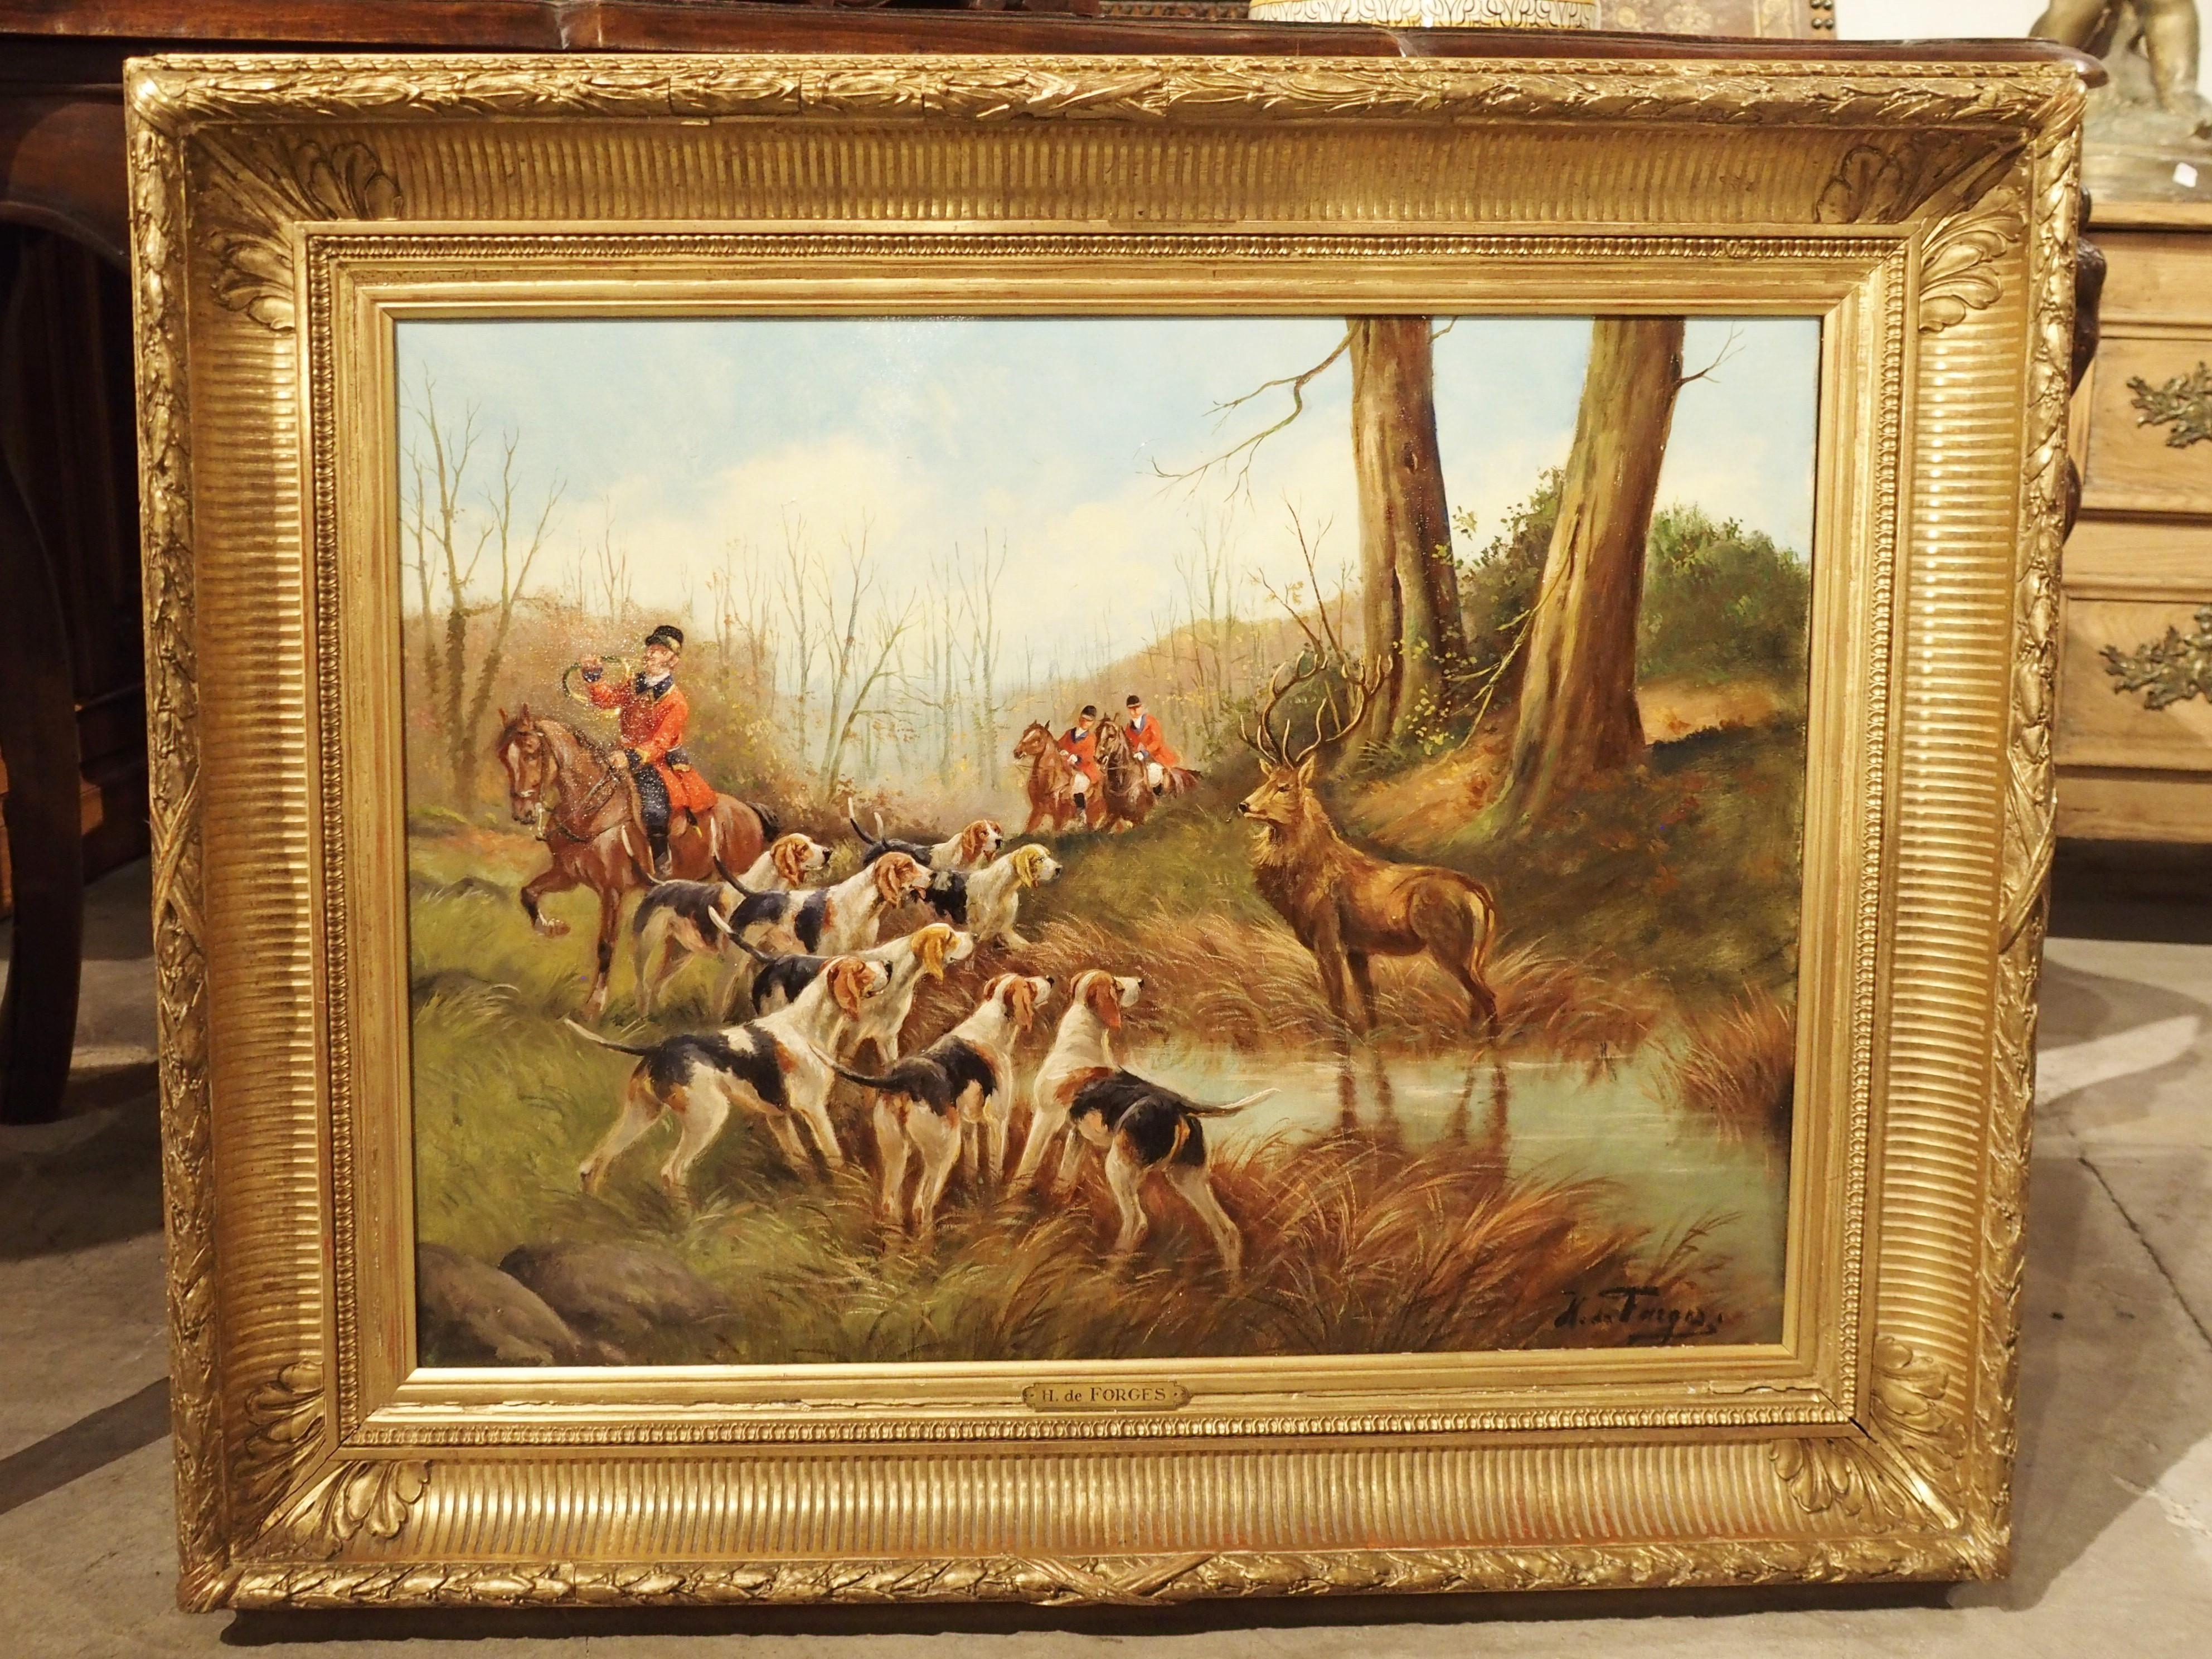 Antique French Oil on Canvas Stag Hunt Painting in Giltwood Frame, H. De Forges For Sale 13